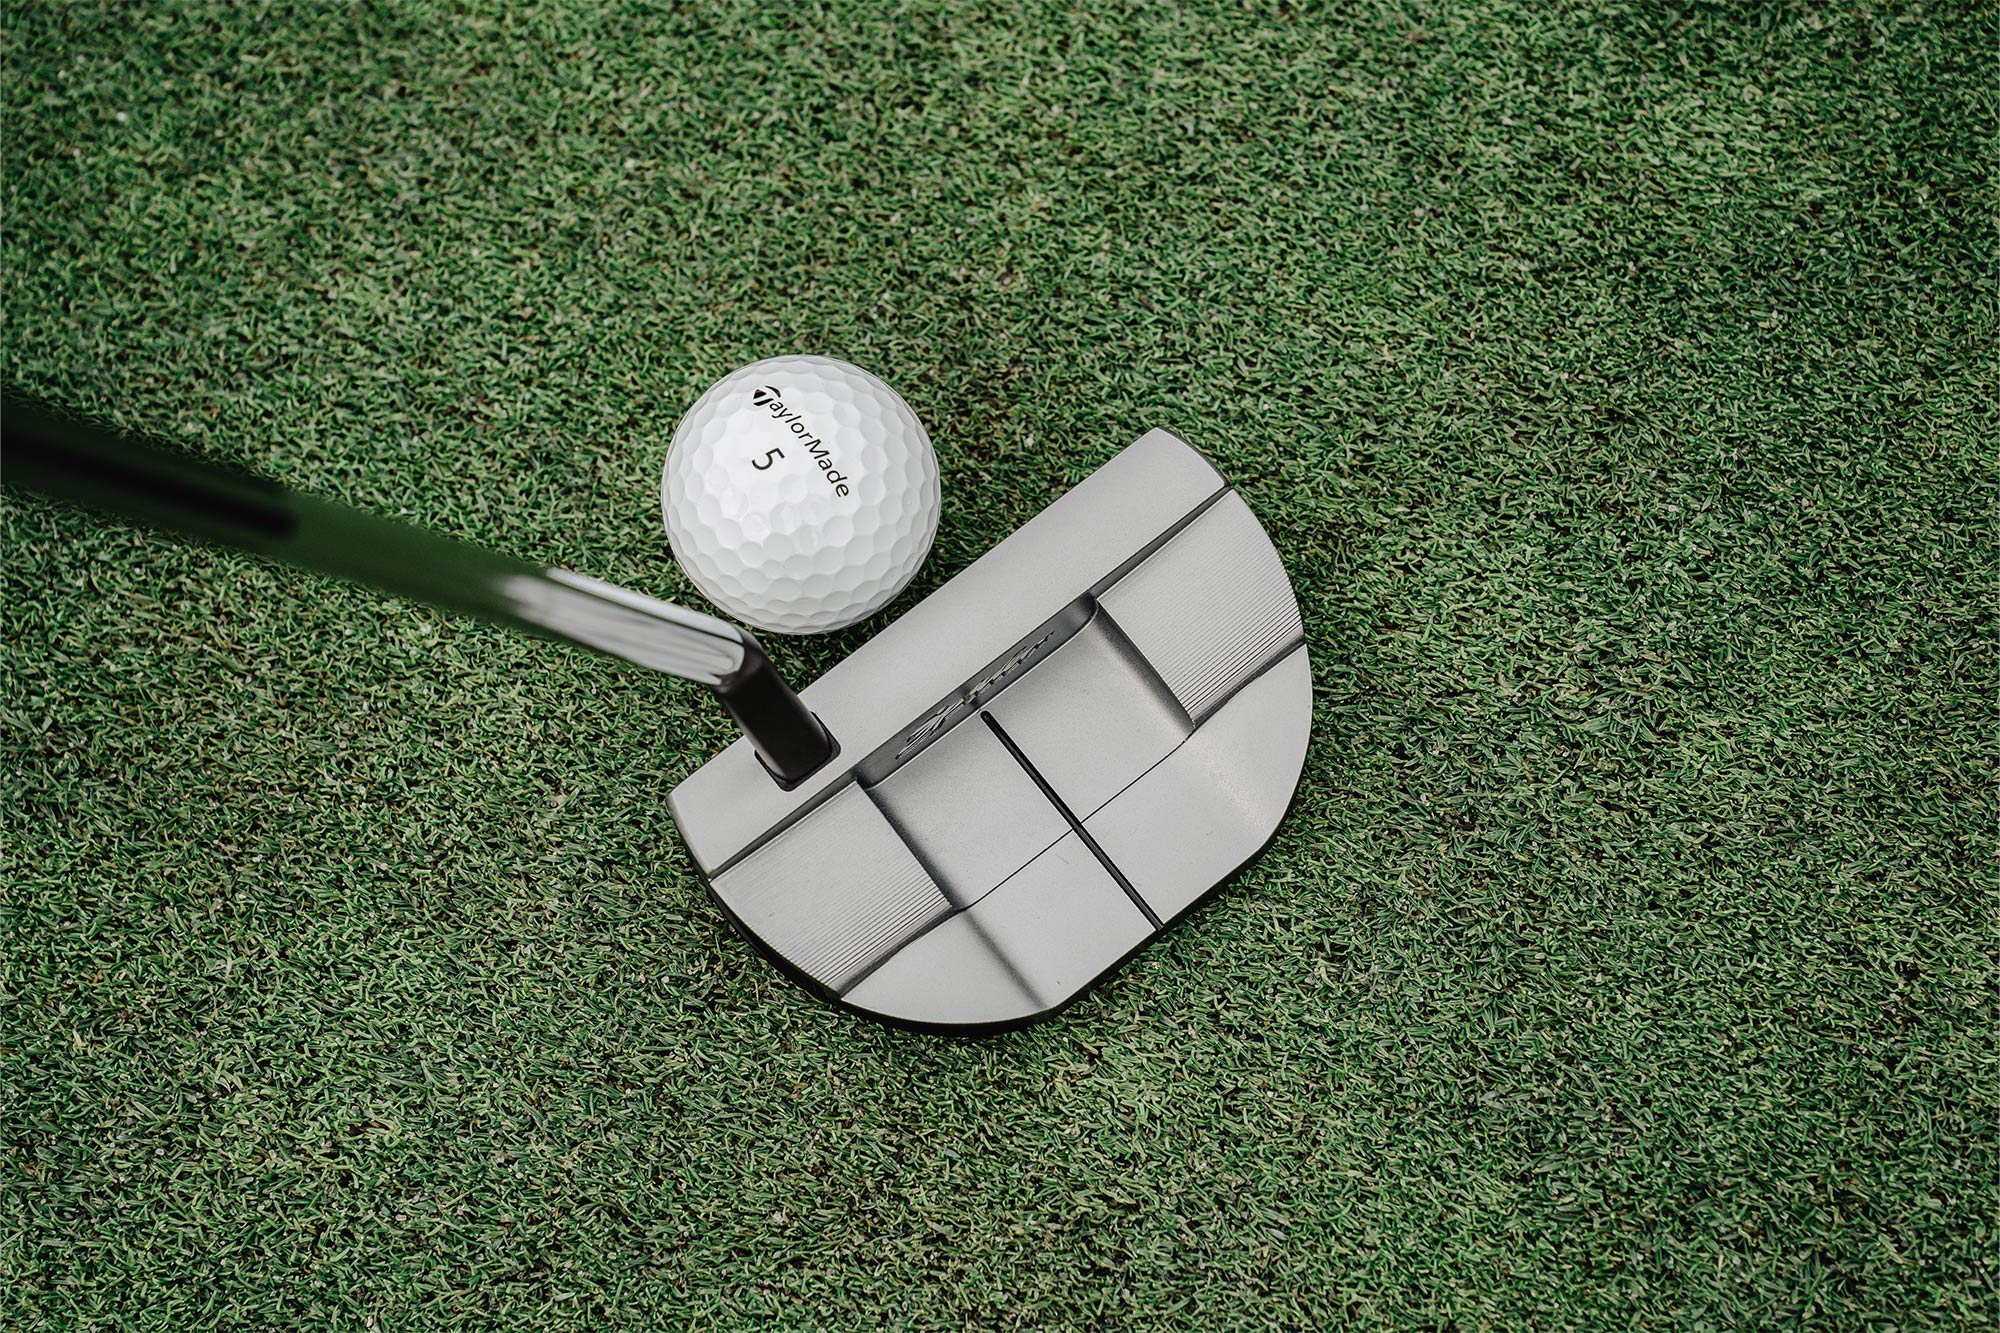 TaylorMade Spider GT putter review